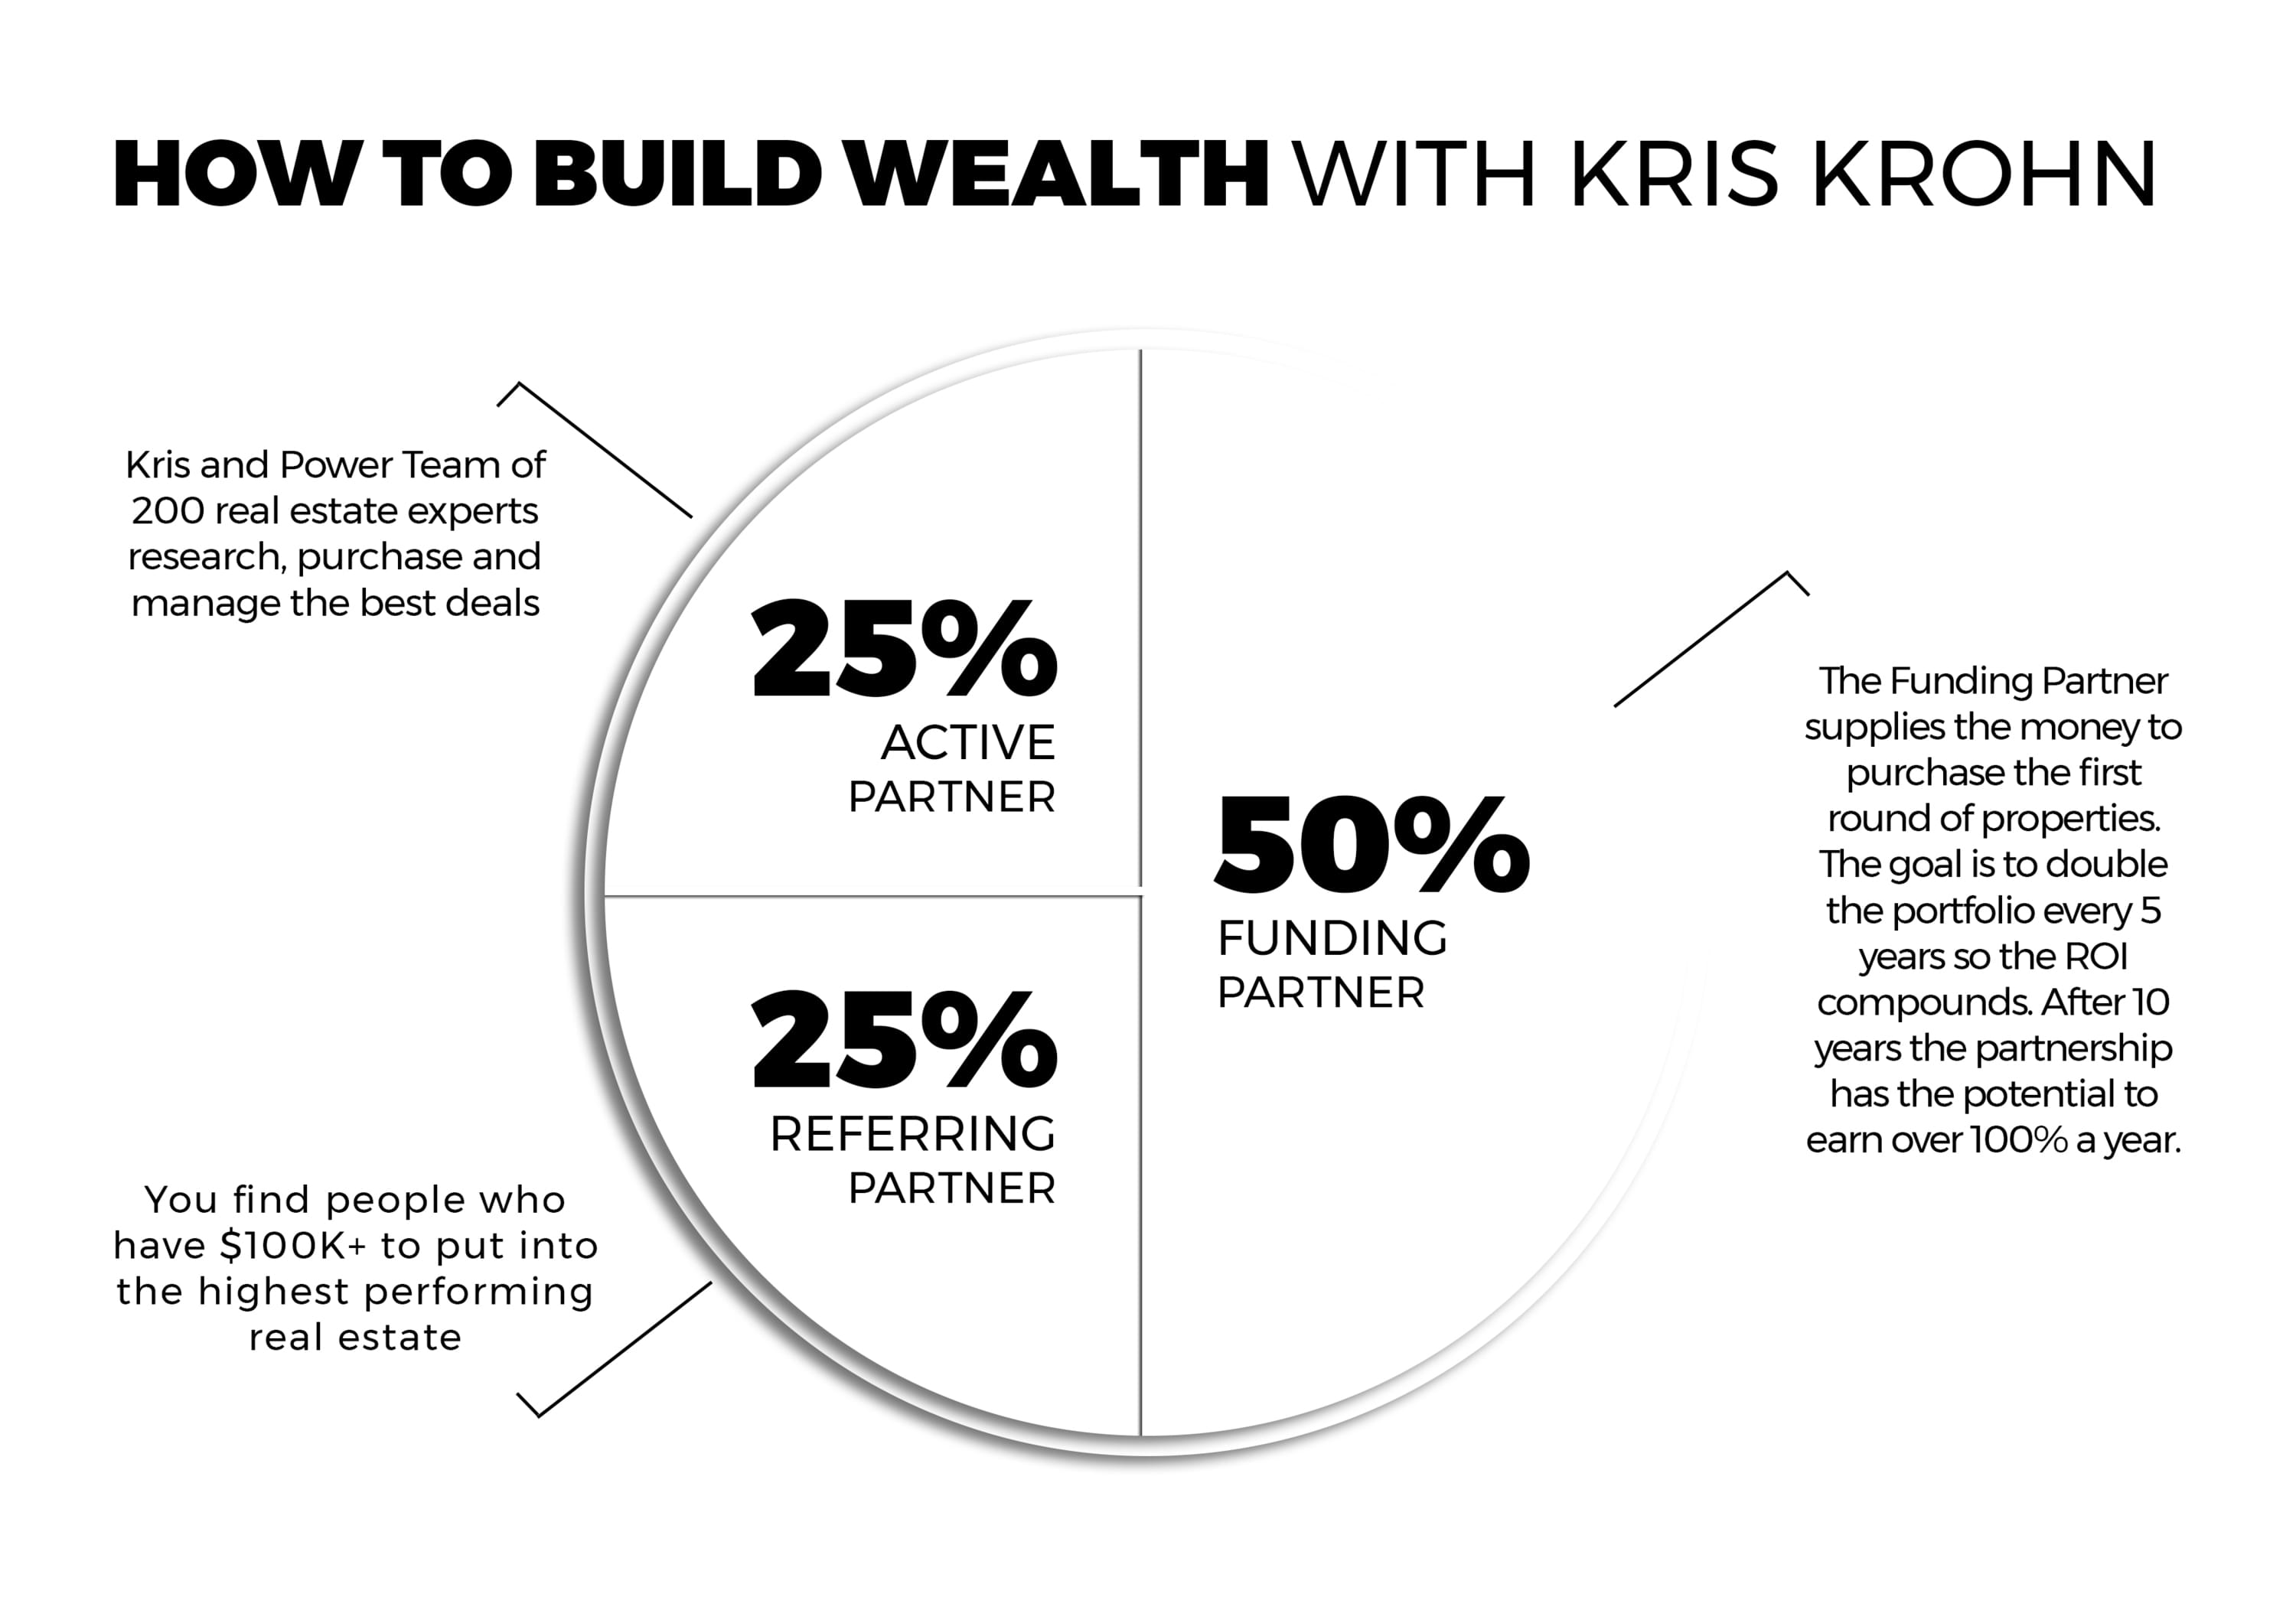 How to build Wealth with Kris Krohn